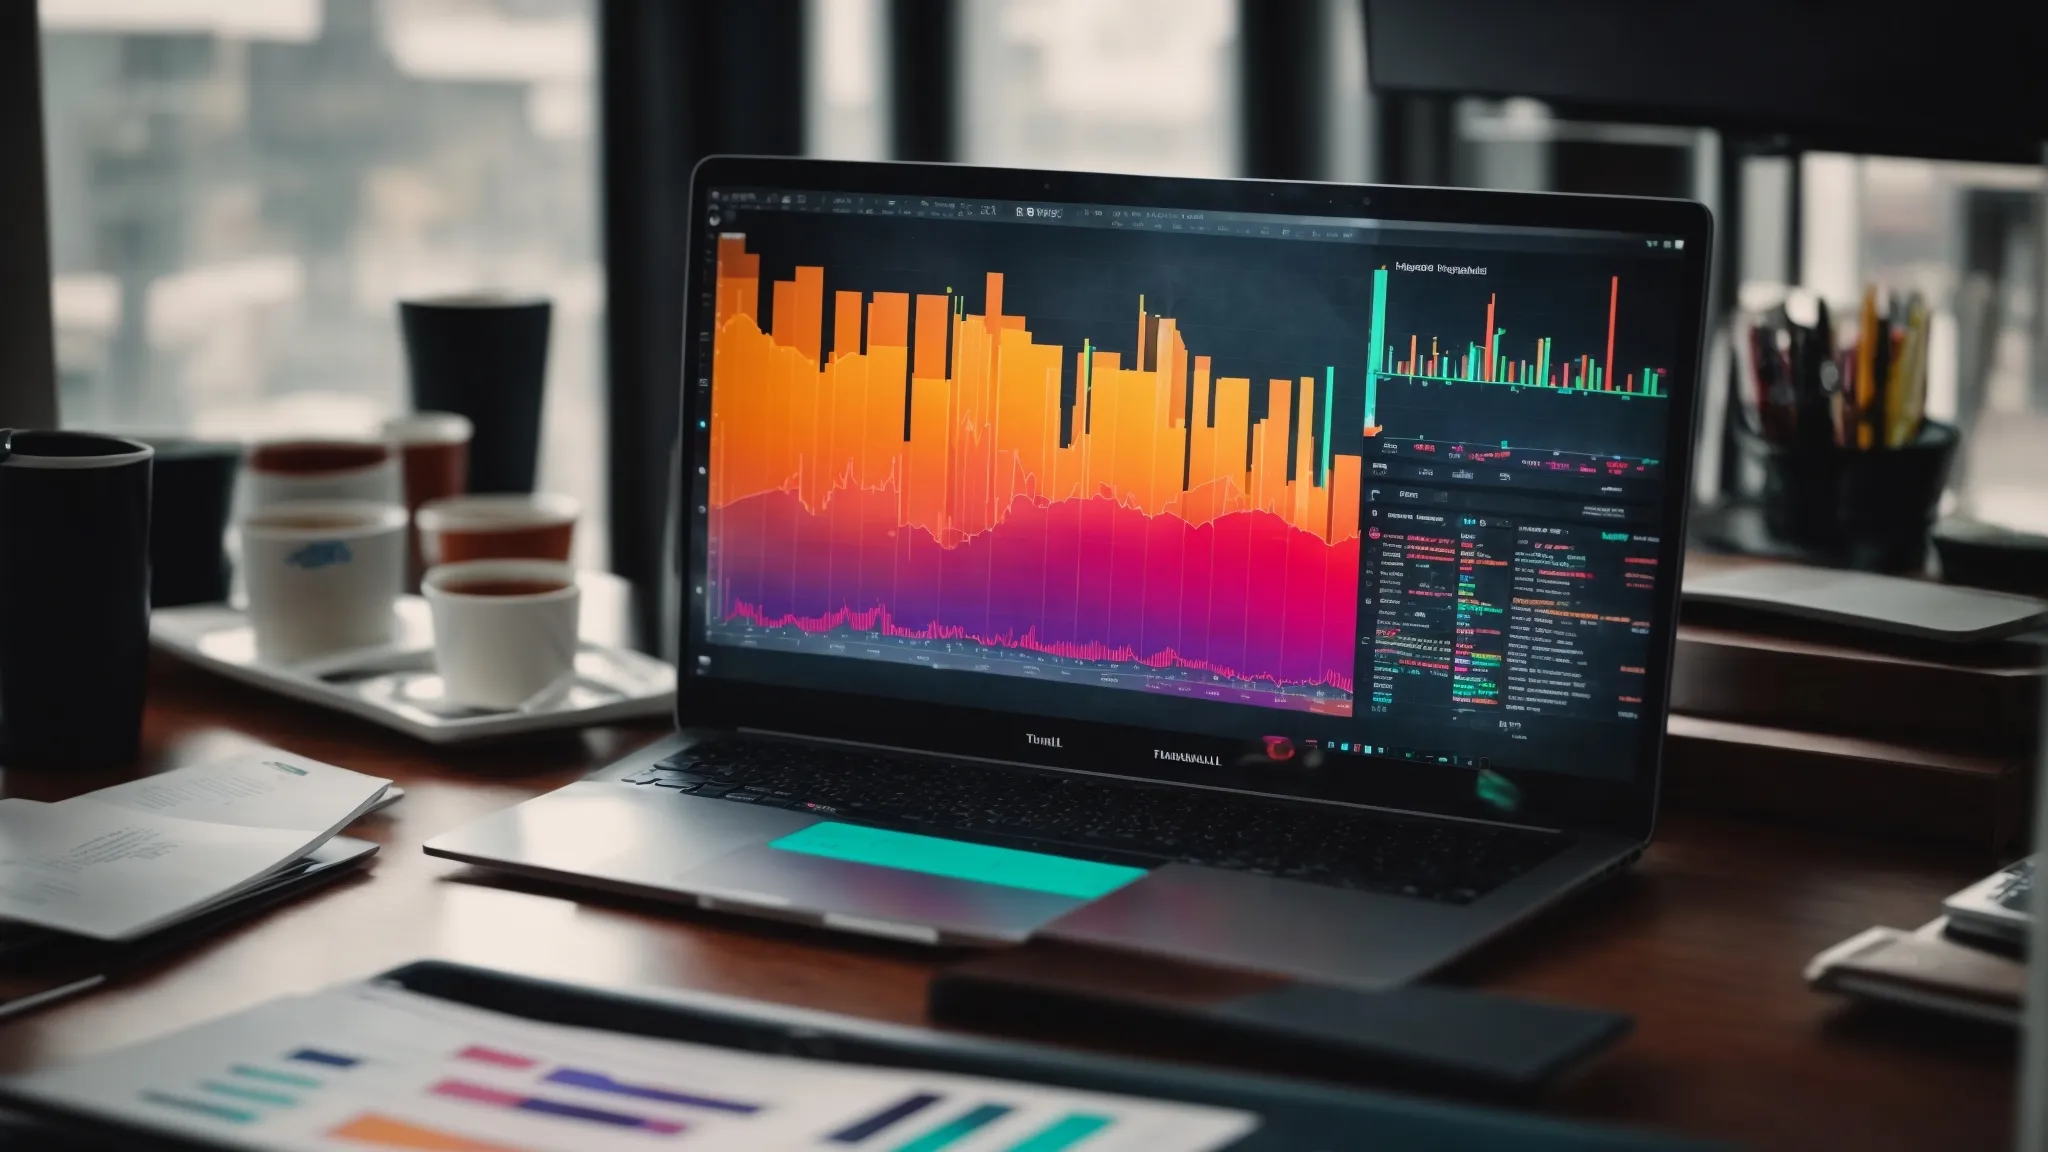 a laptop open on an office desk displaying colorful graphs and charts for seo data analysis.